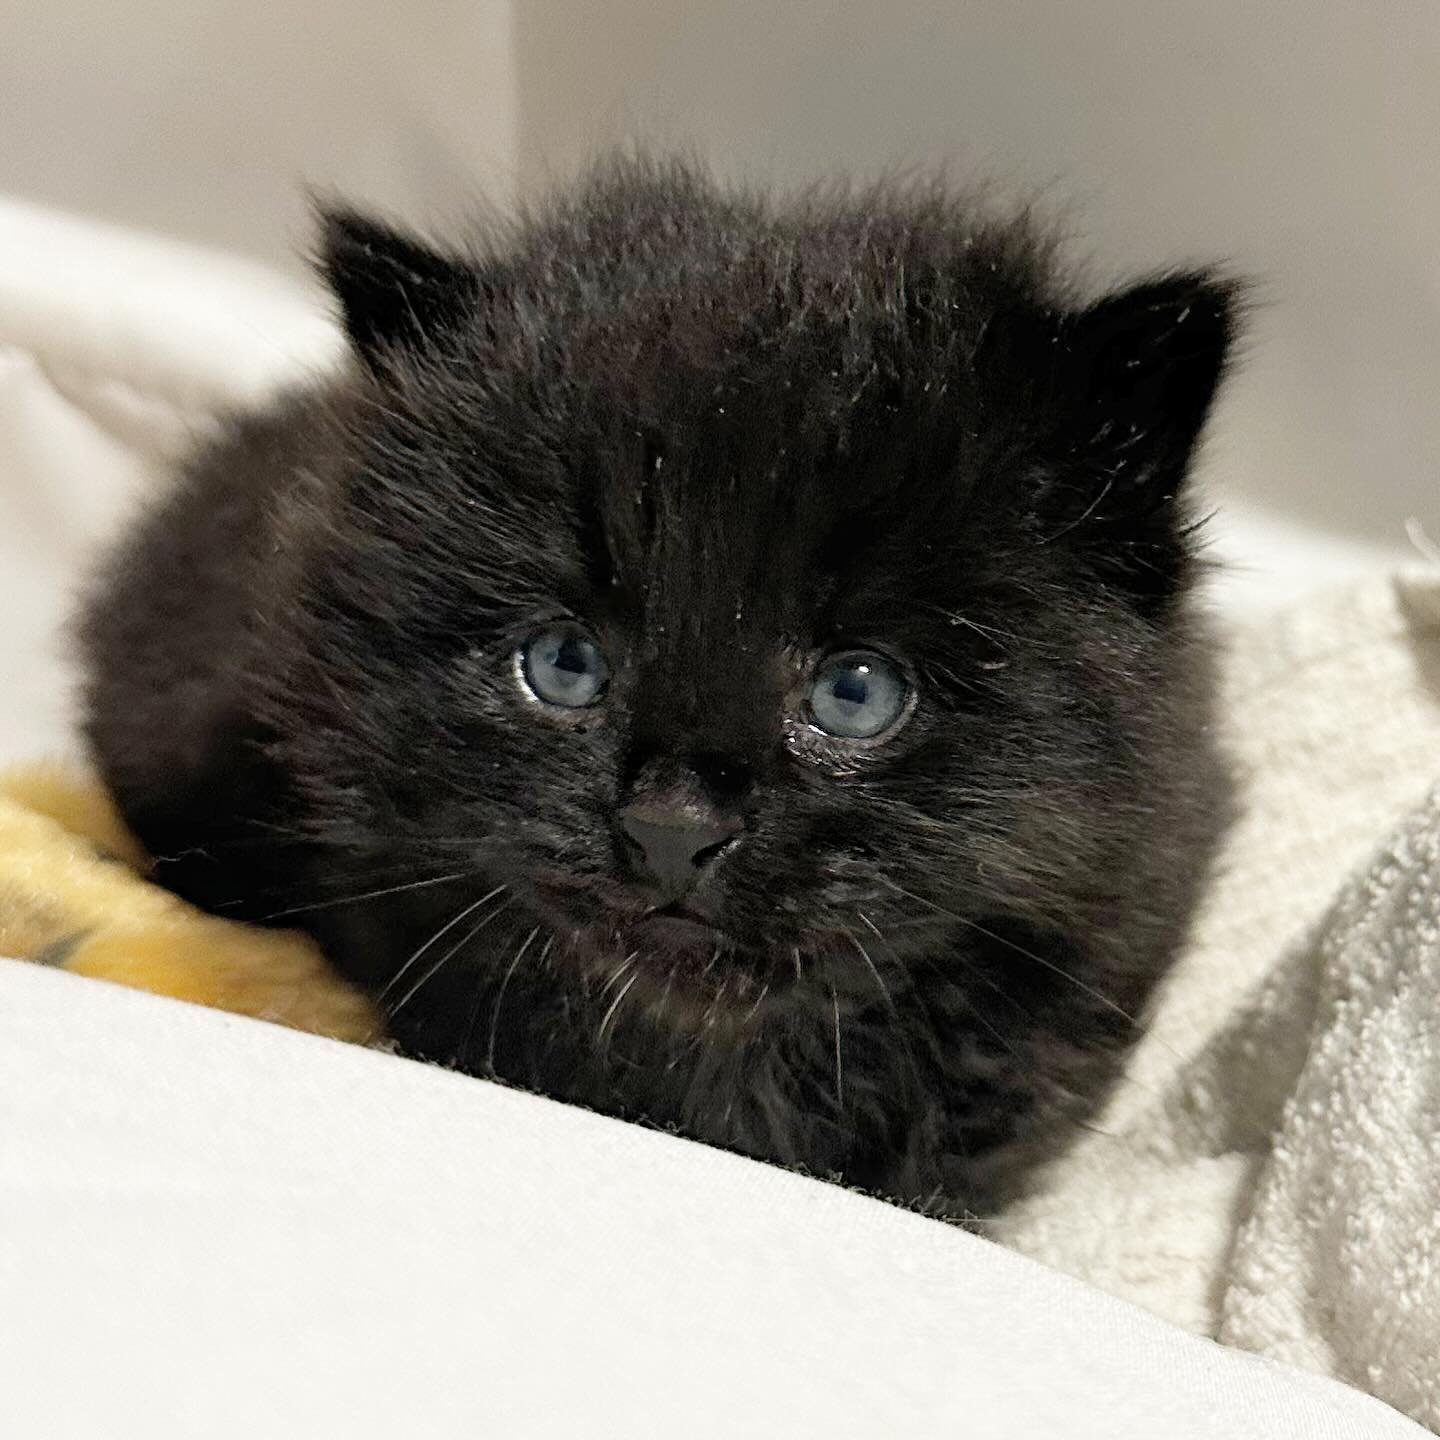 Kitten season is upon us! Our rescue has recently expanded to be able to take in the smallest of kittens, but we need your help to get this program up and running. 

We will only be able to take in orphaned kittens, or moms with kittens, if we have t